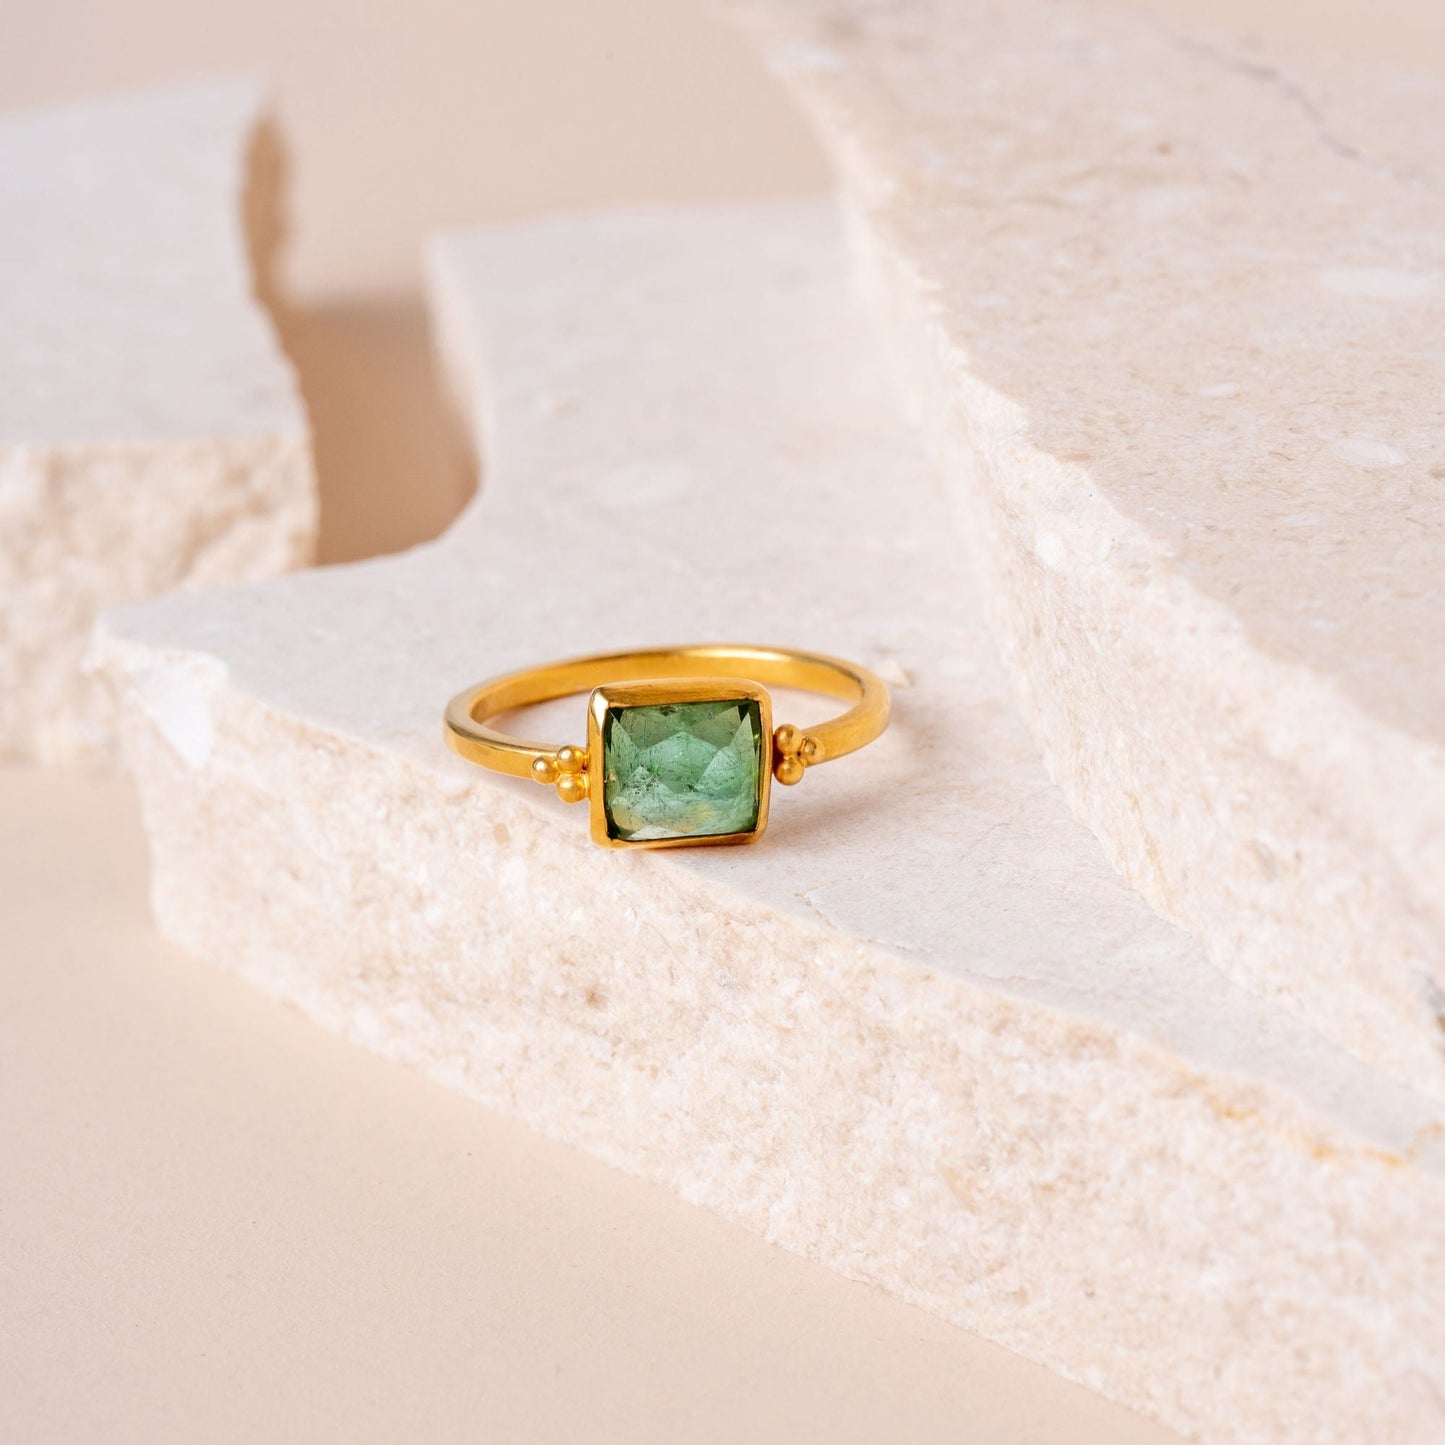 Intricately designed gold ring, adorned with fine granulation and centered around a vibrant green square tourmaline.